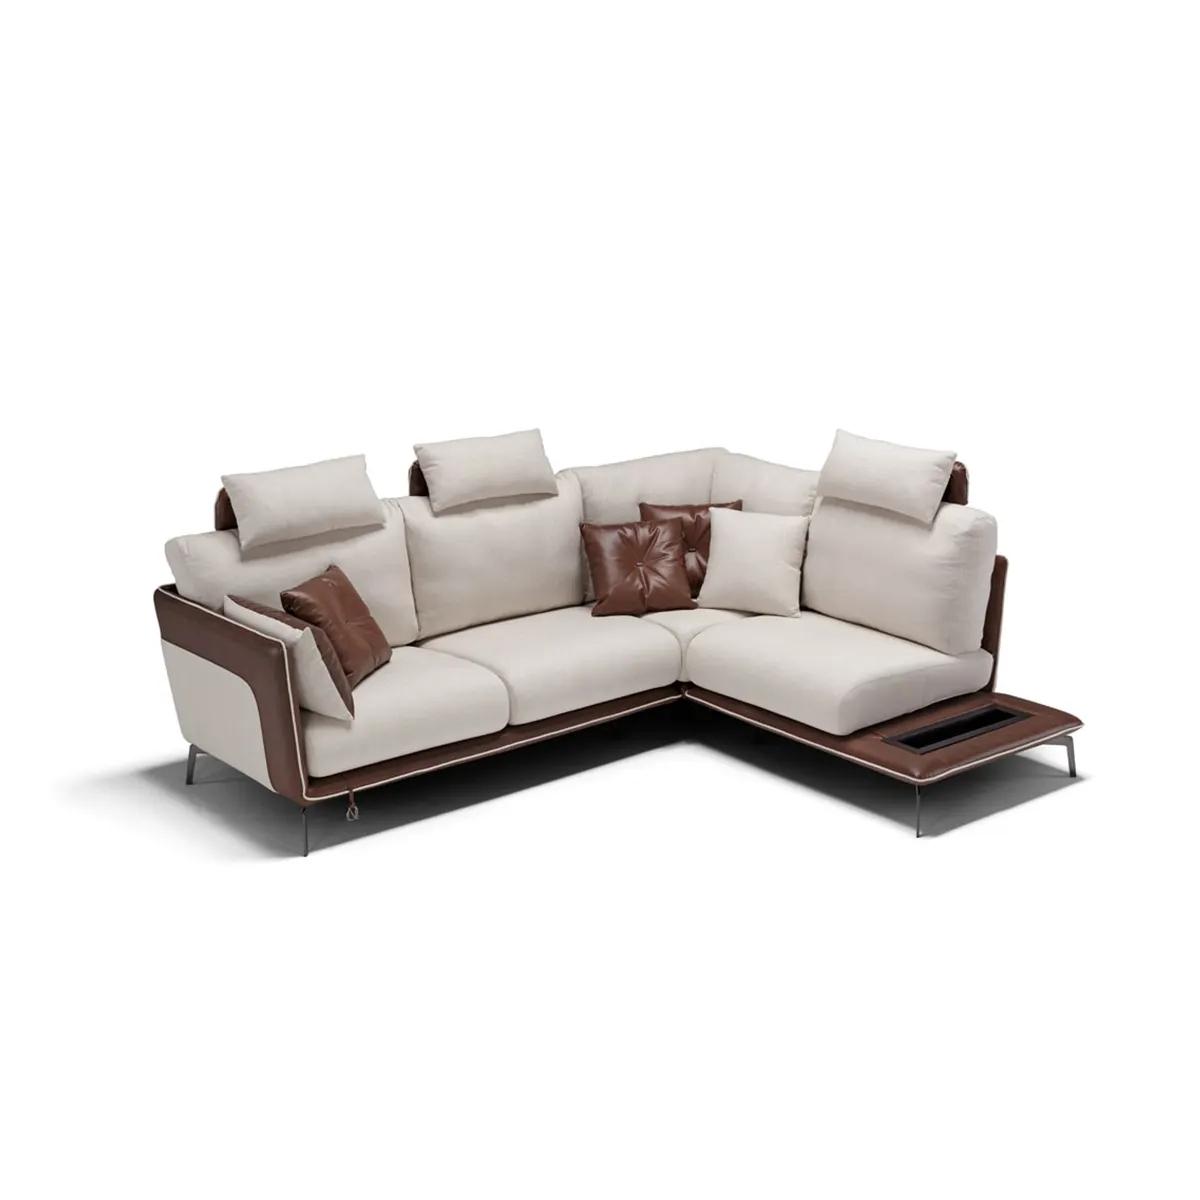 Made in Italy Design Sofa With Slim Armrests Covered In Leather And Fabric Upholstery With Removable Coating